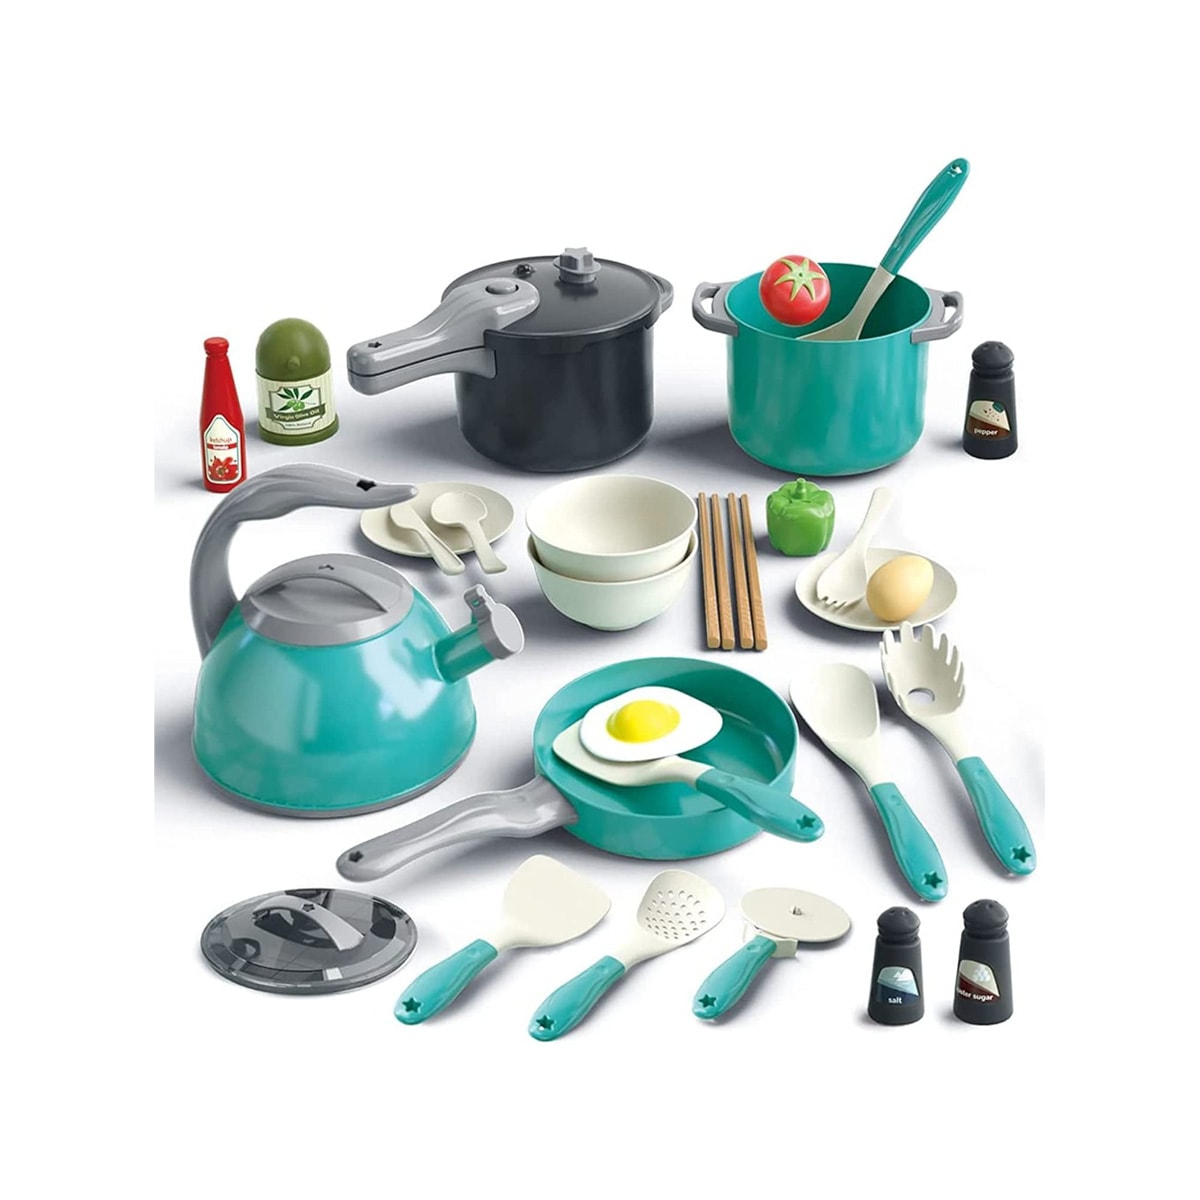 A set of toy kitchen items that are mostly teal, white and black.